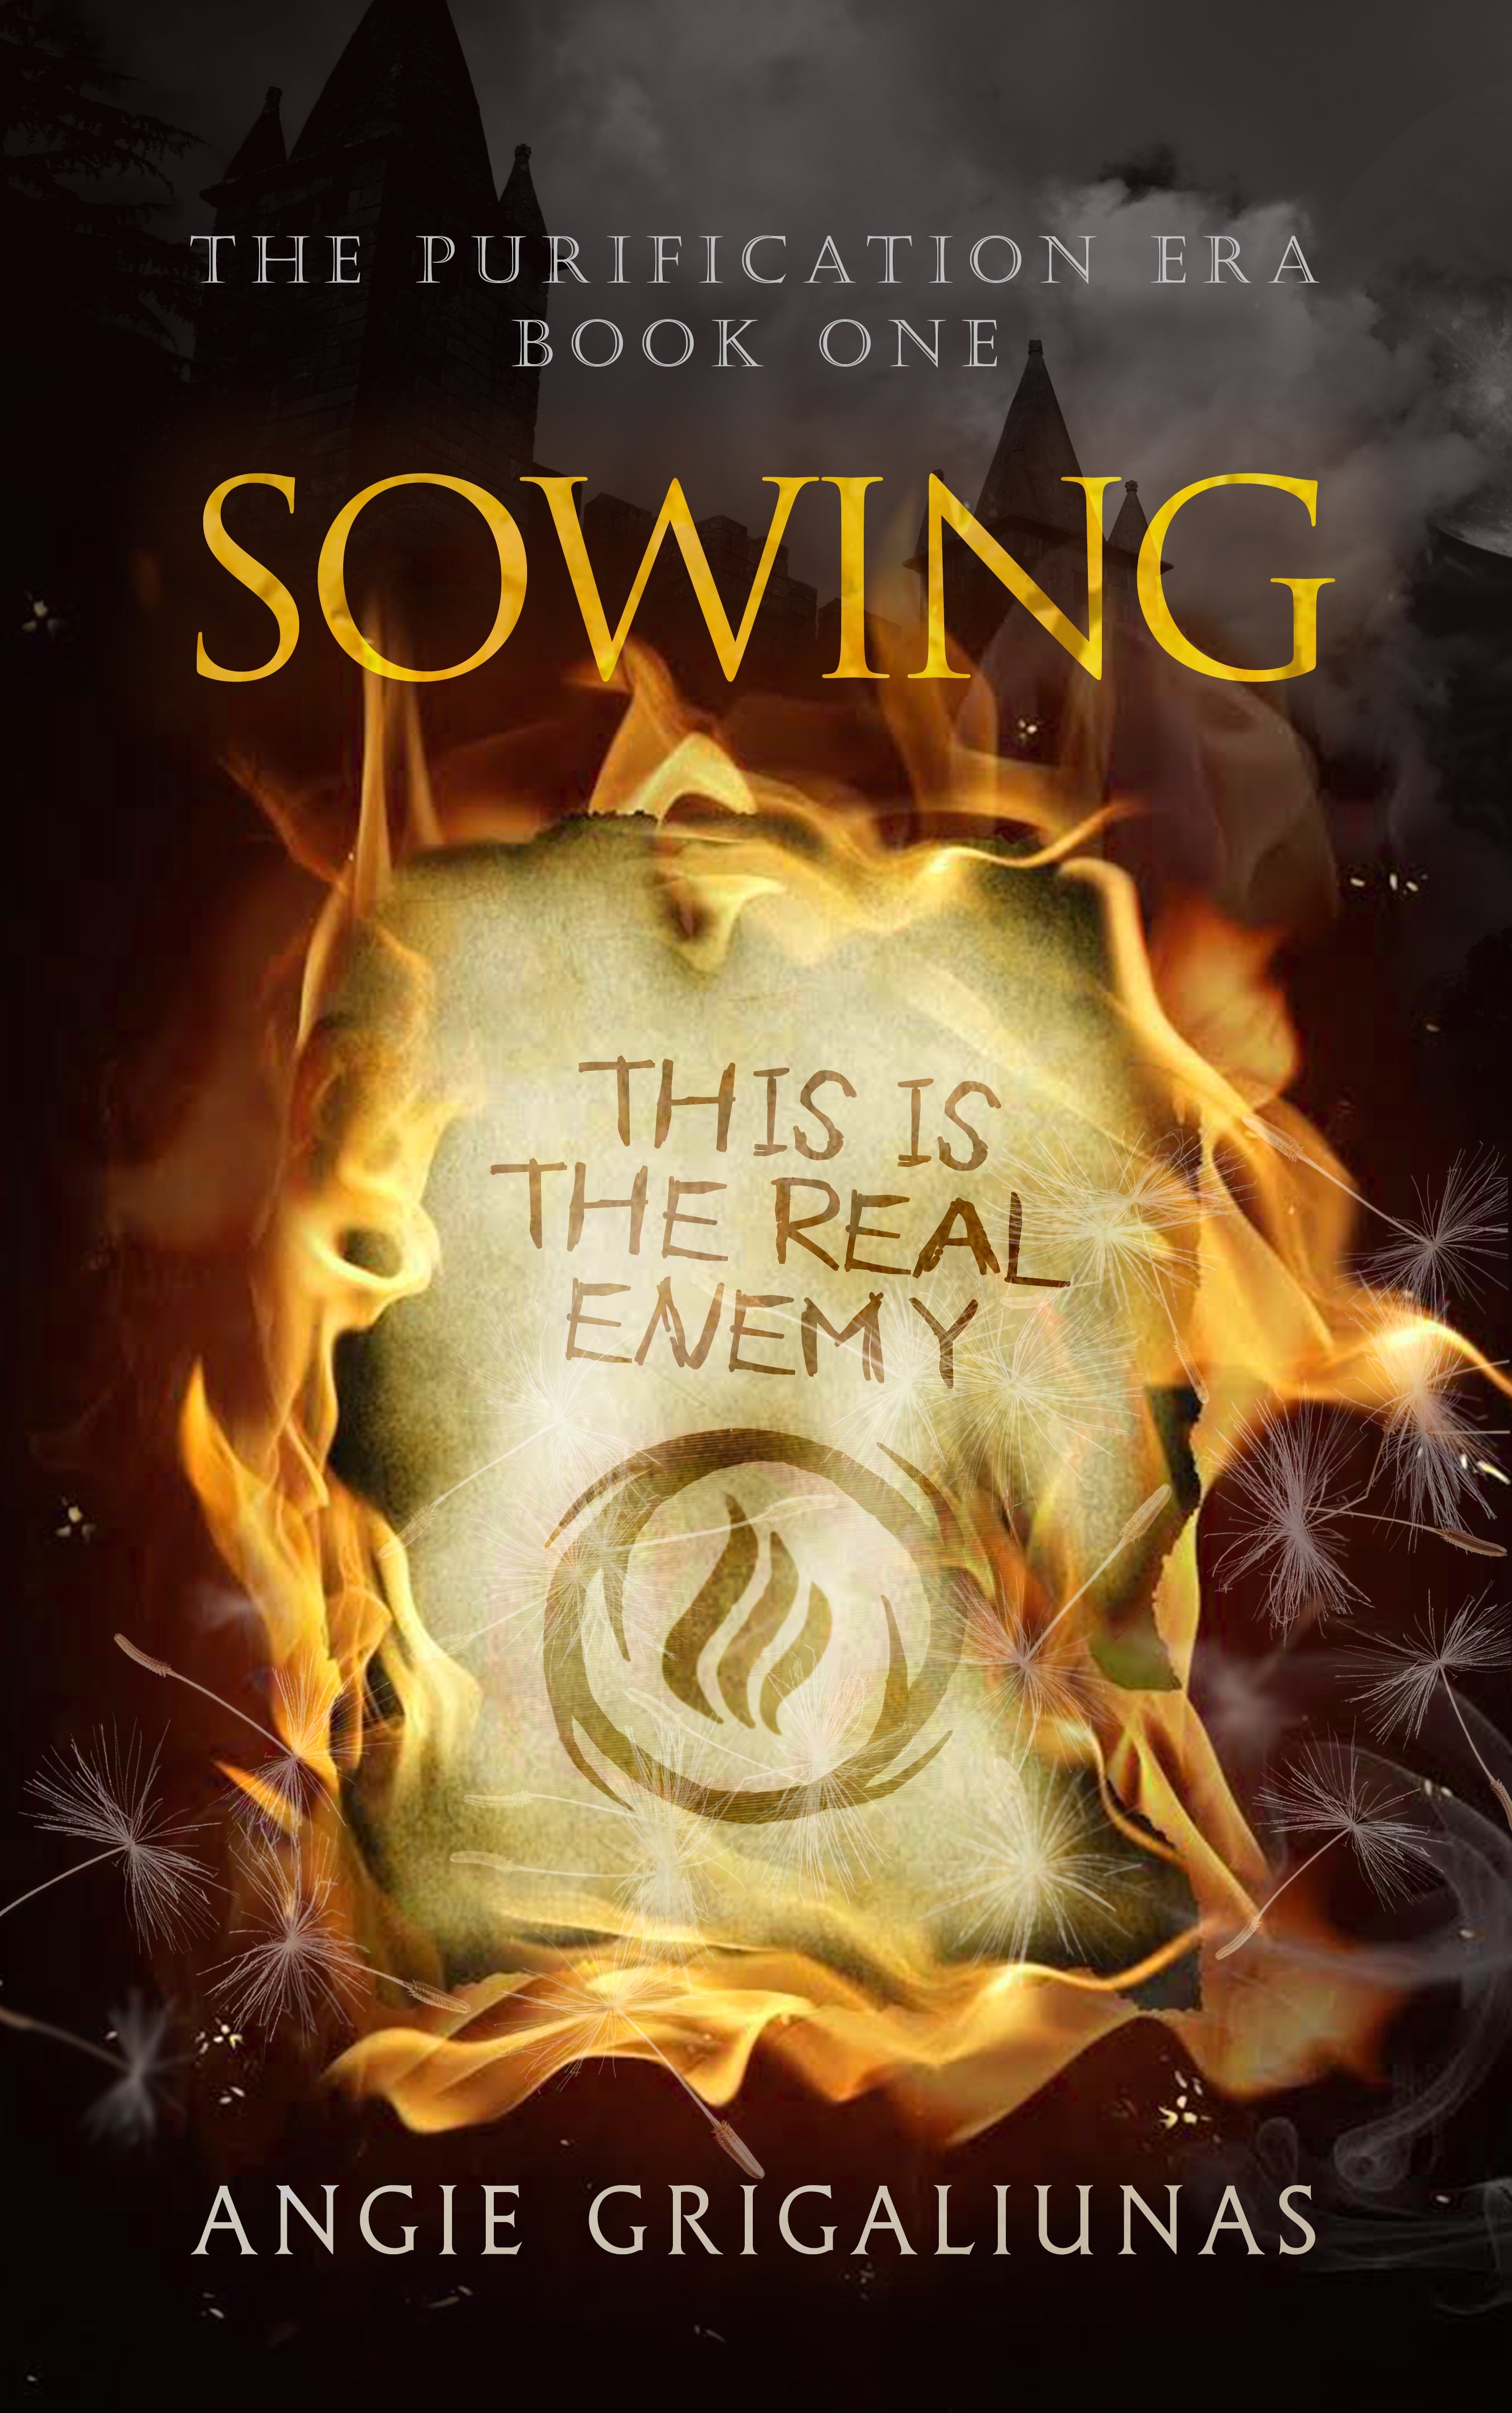 Book Review: Sowing by Angie Grigalunias